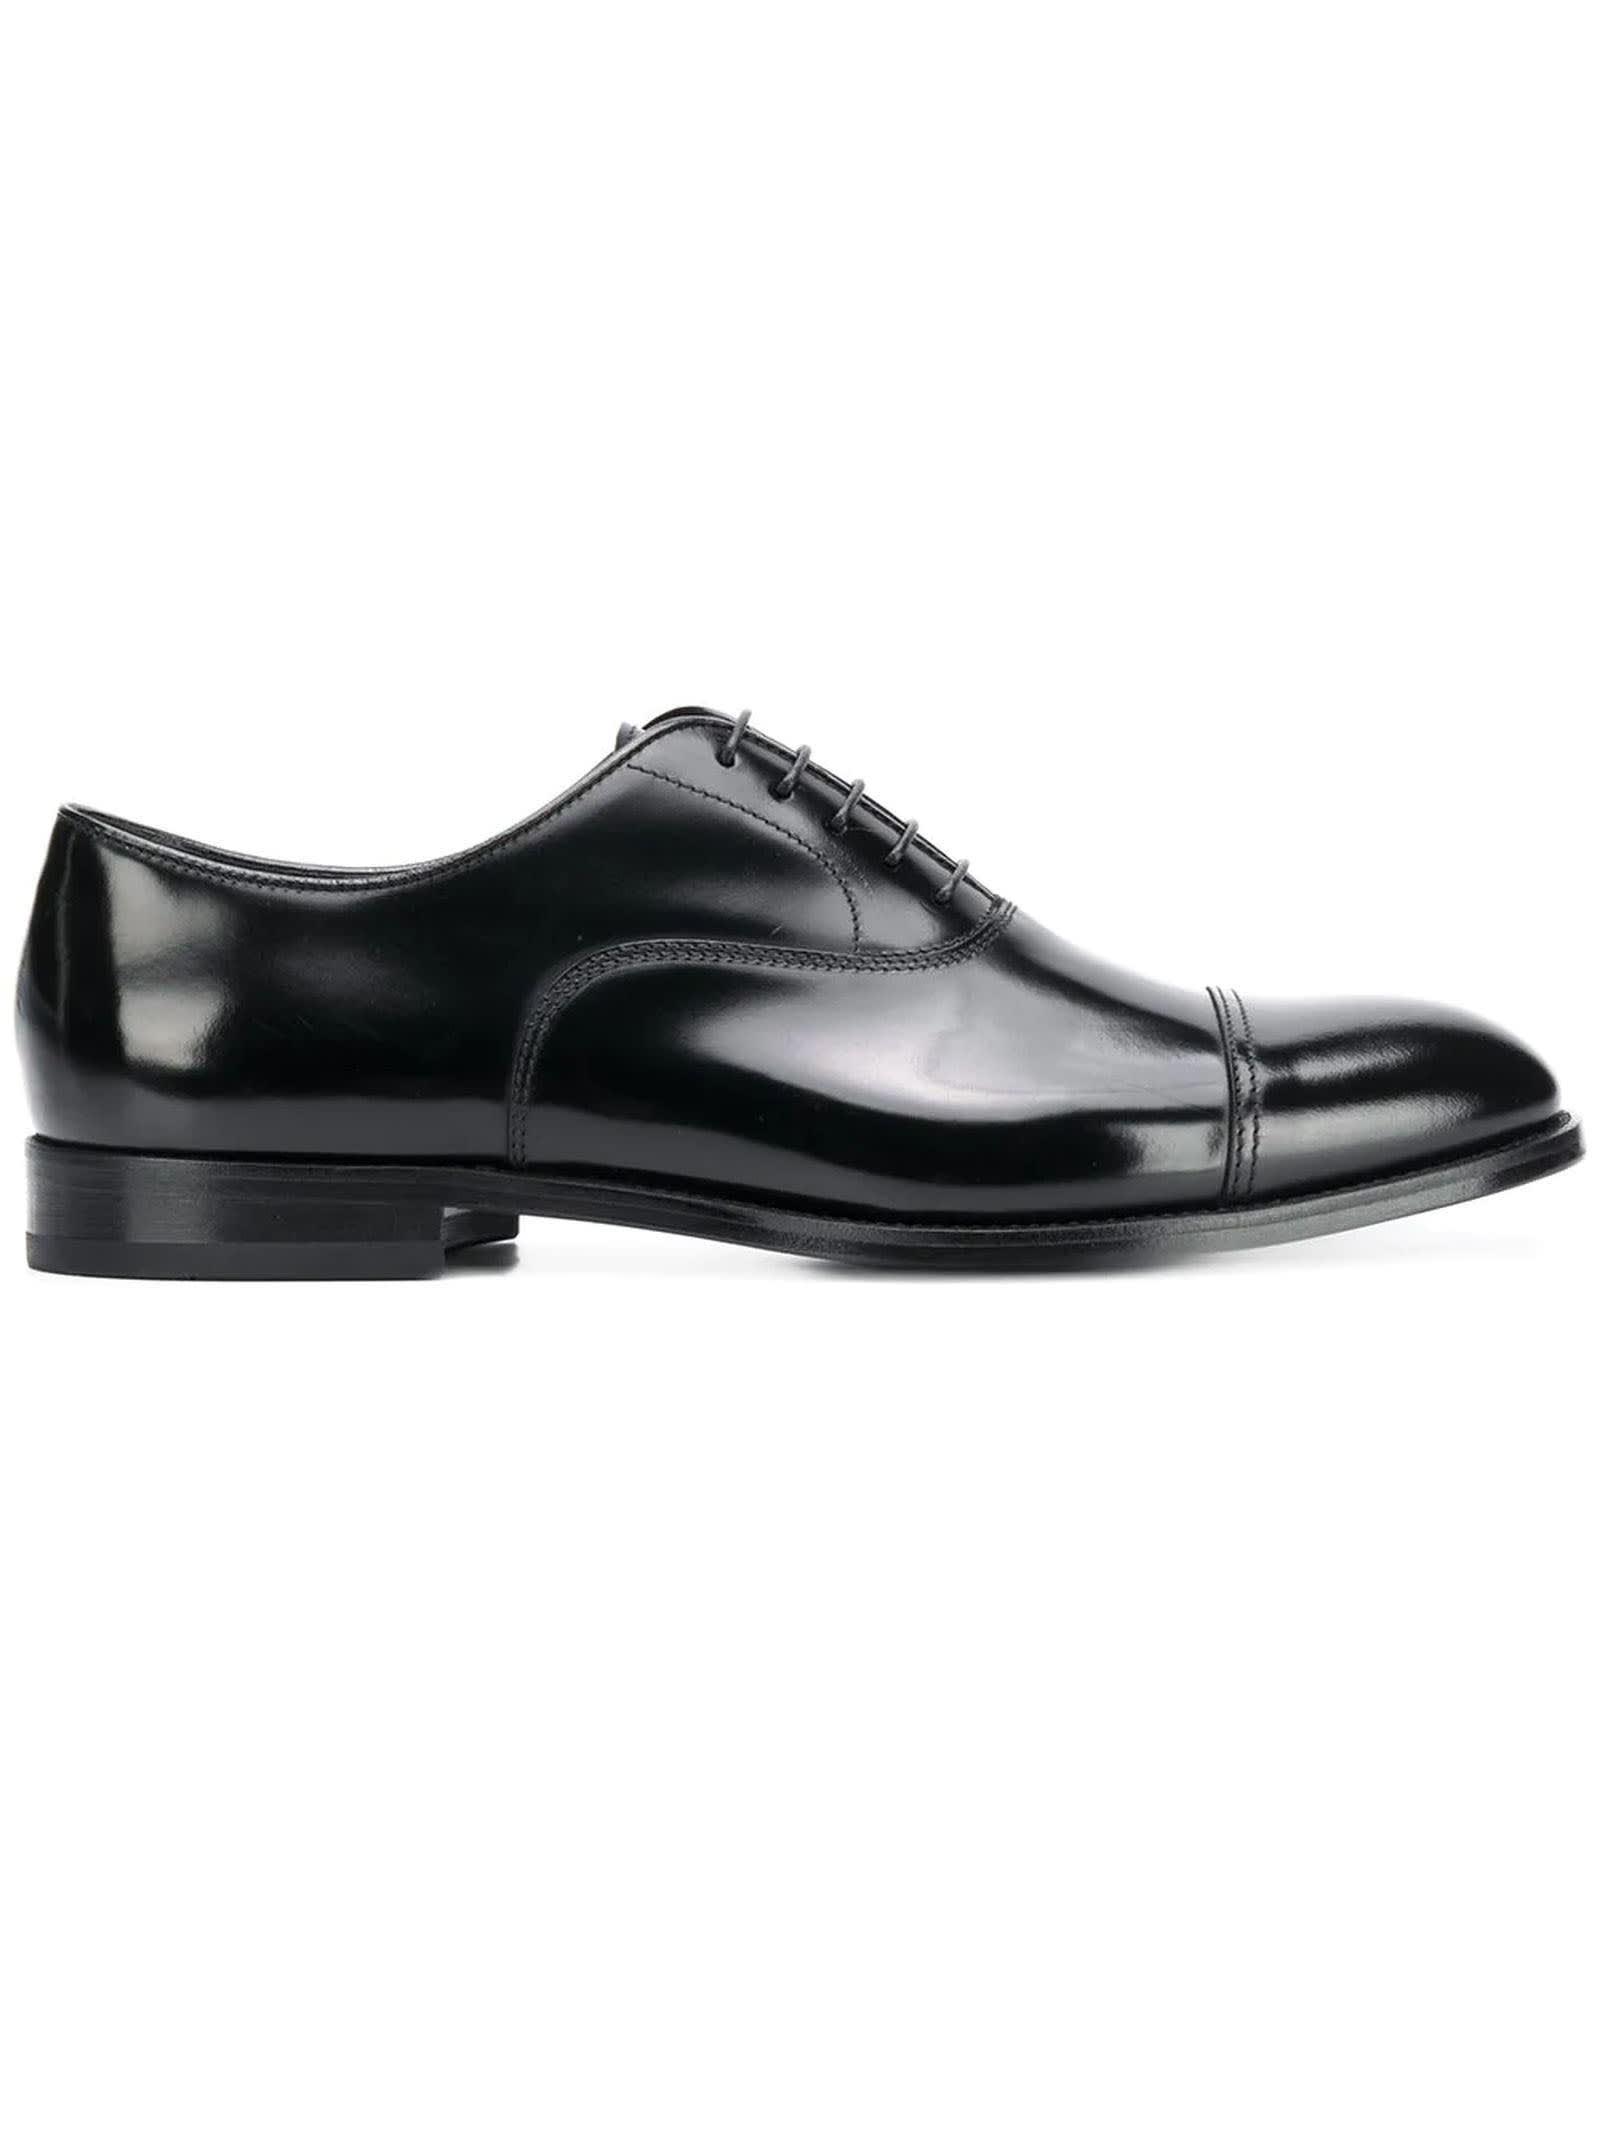 Doucal's Black Calf Leather Classic Oxford Shoes